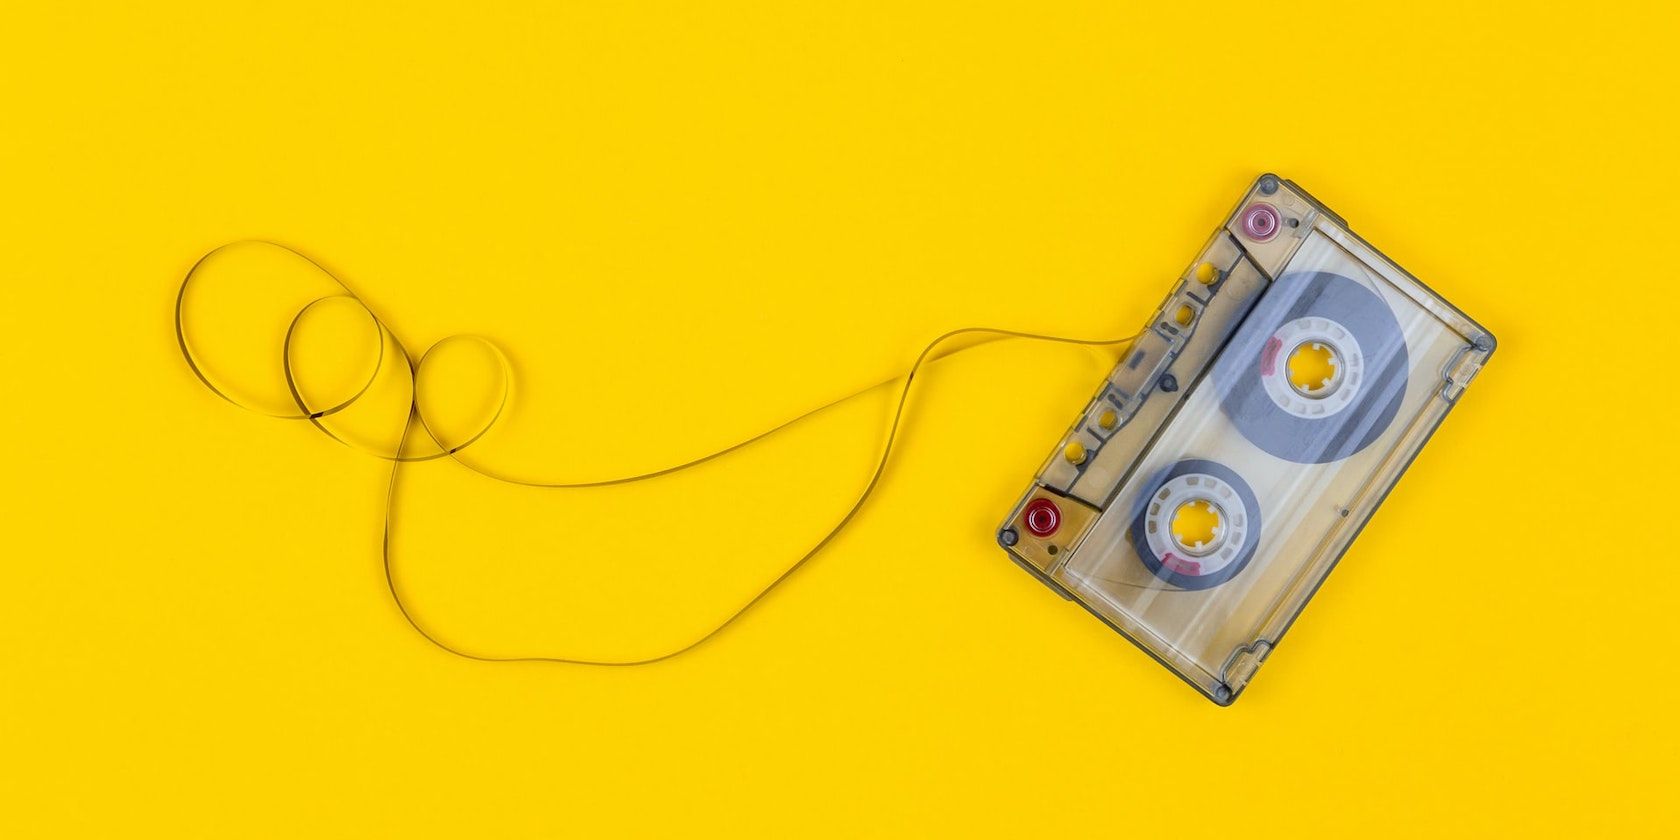 A photo of a cassete tape on a yellow background.